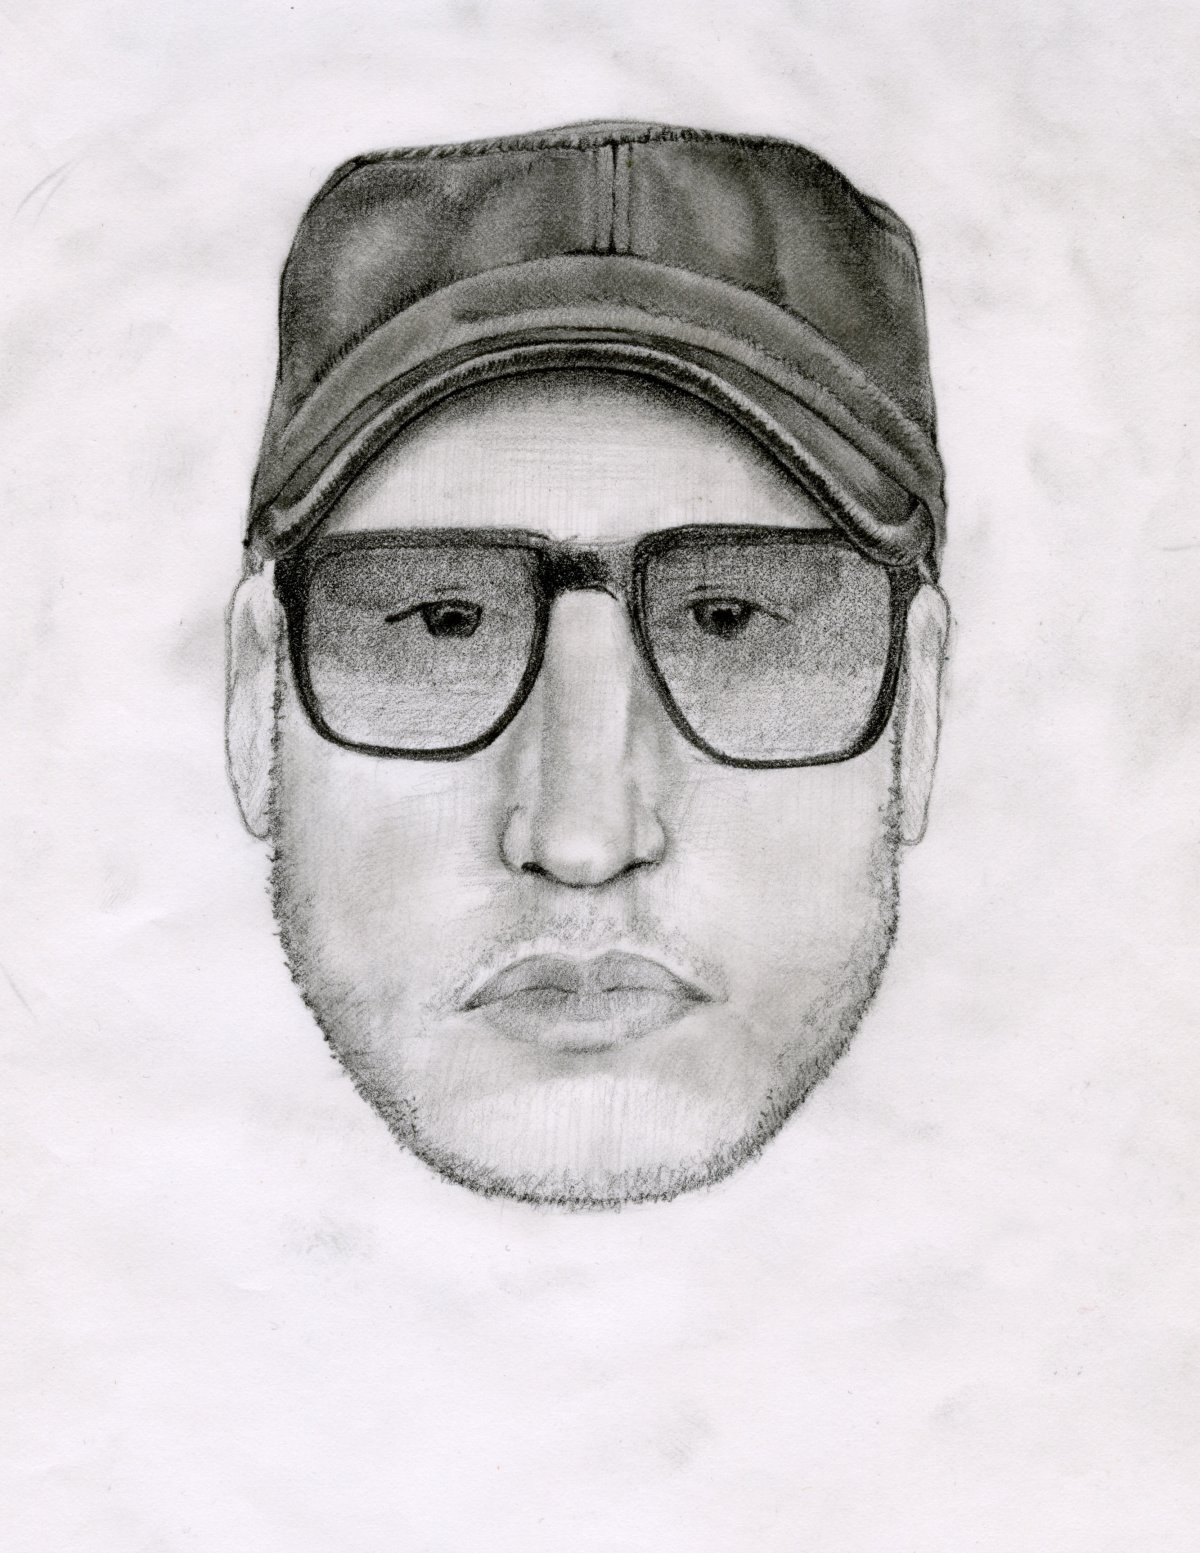 Composite sketch of man who exposed himself to 13-year-old girl released - image